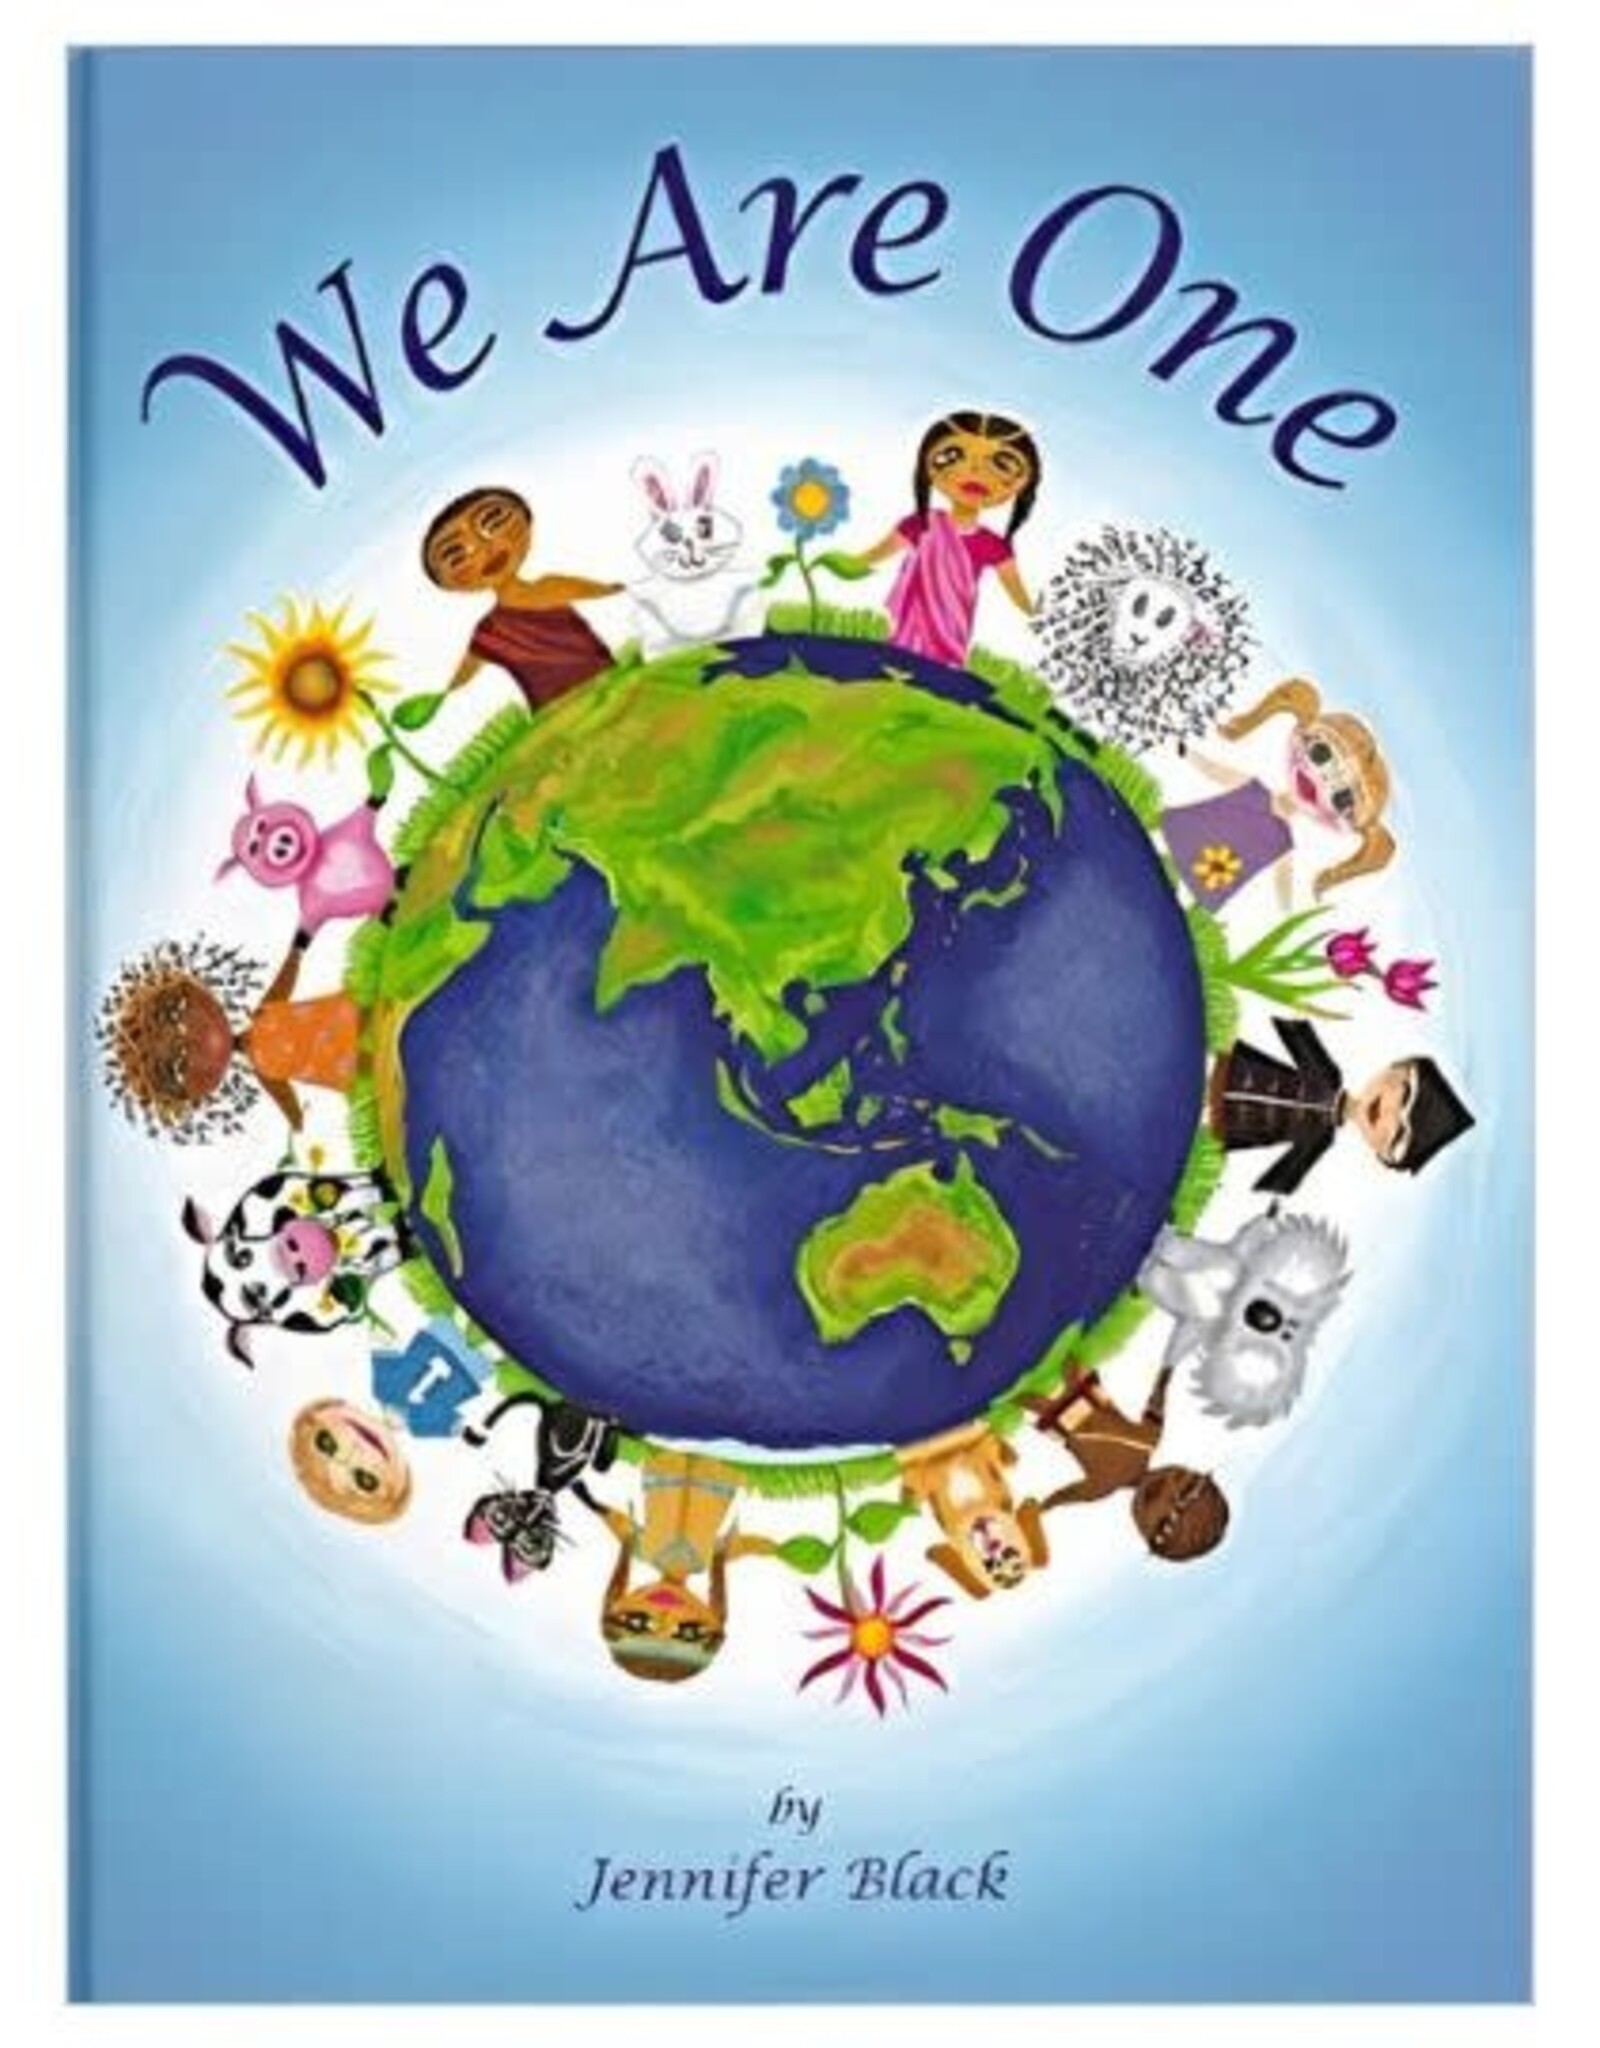 We Are One by Jennifer Black